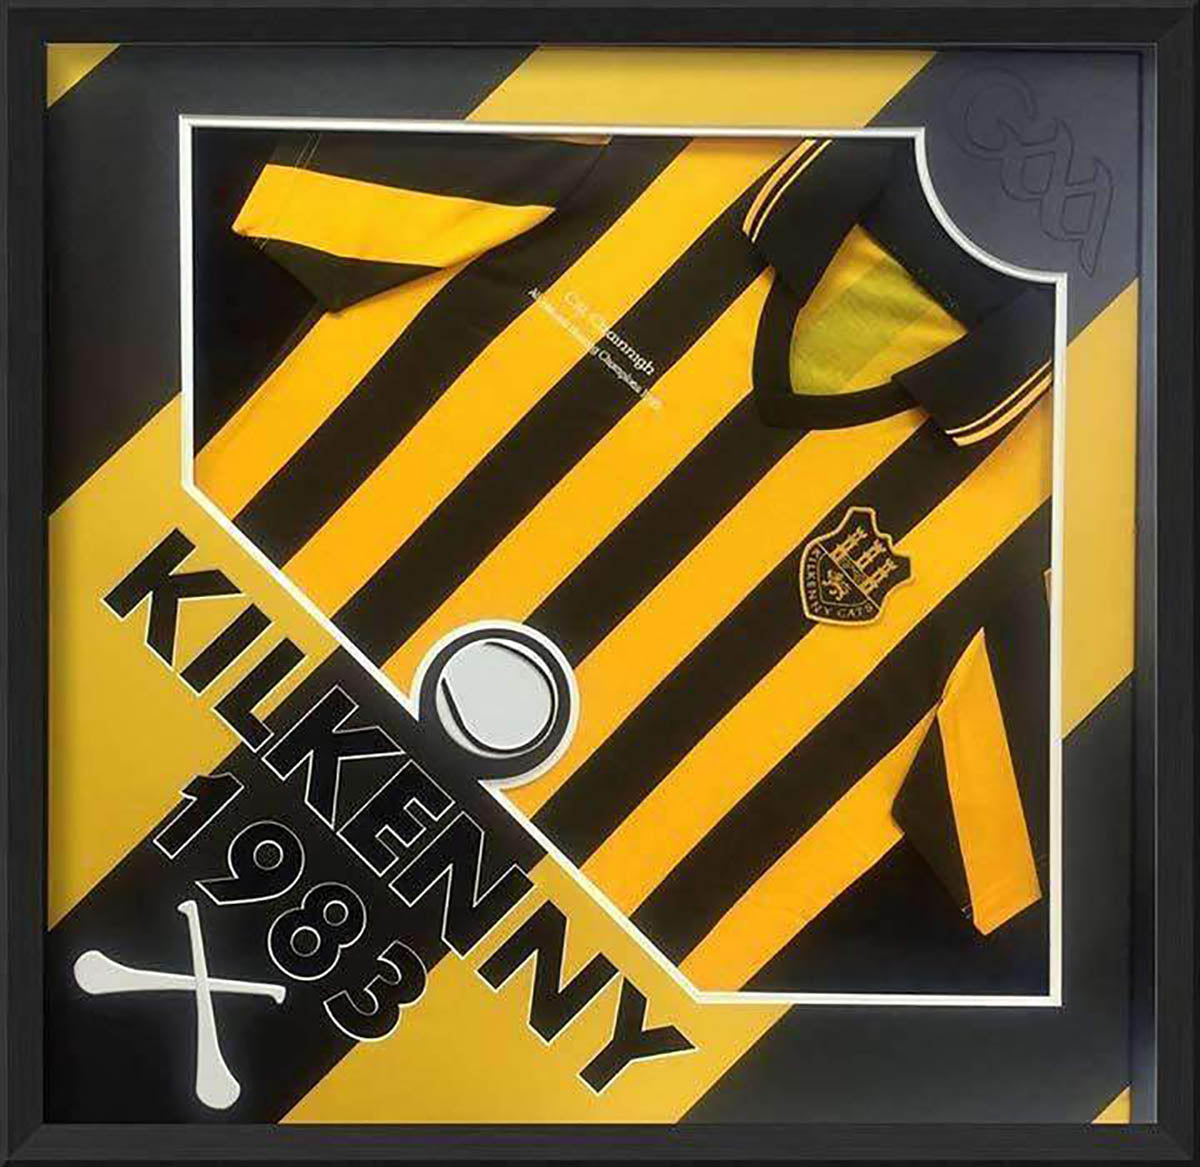 Hurling Jersey frame - with multi-graphical design elements